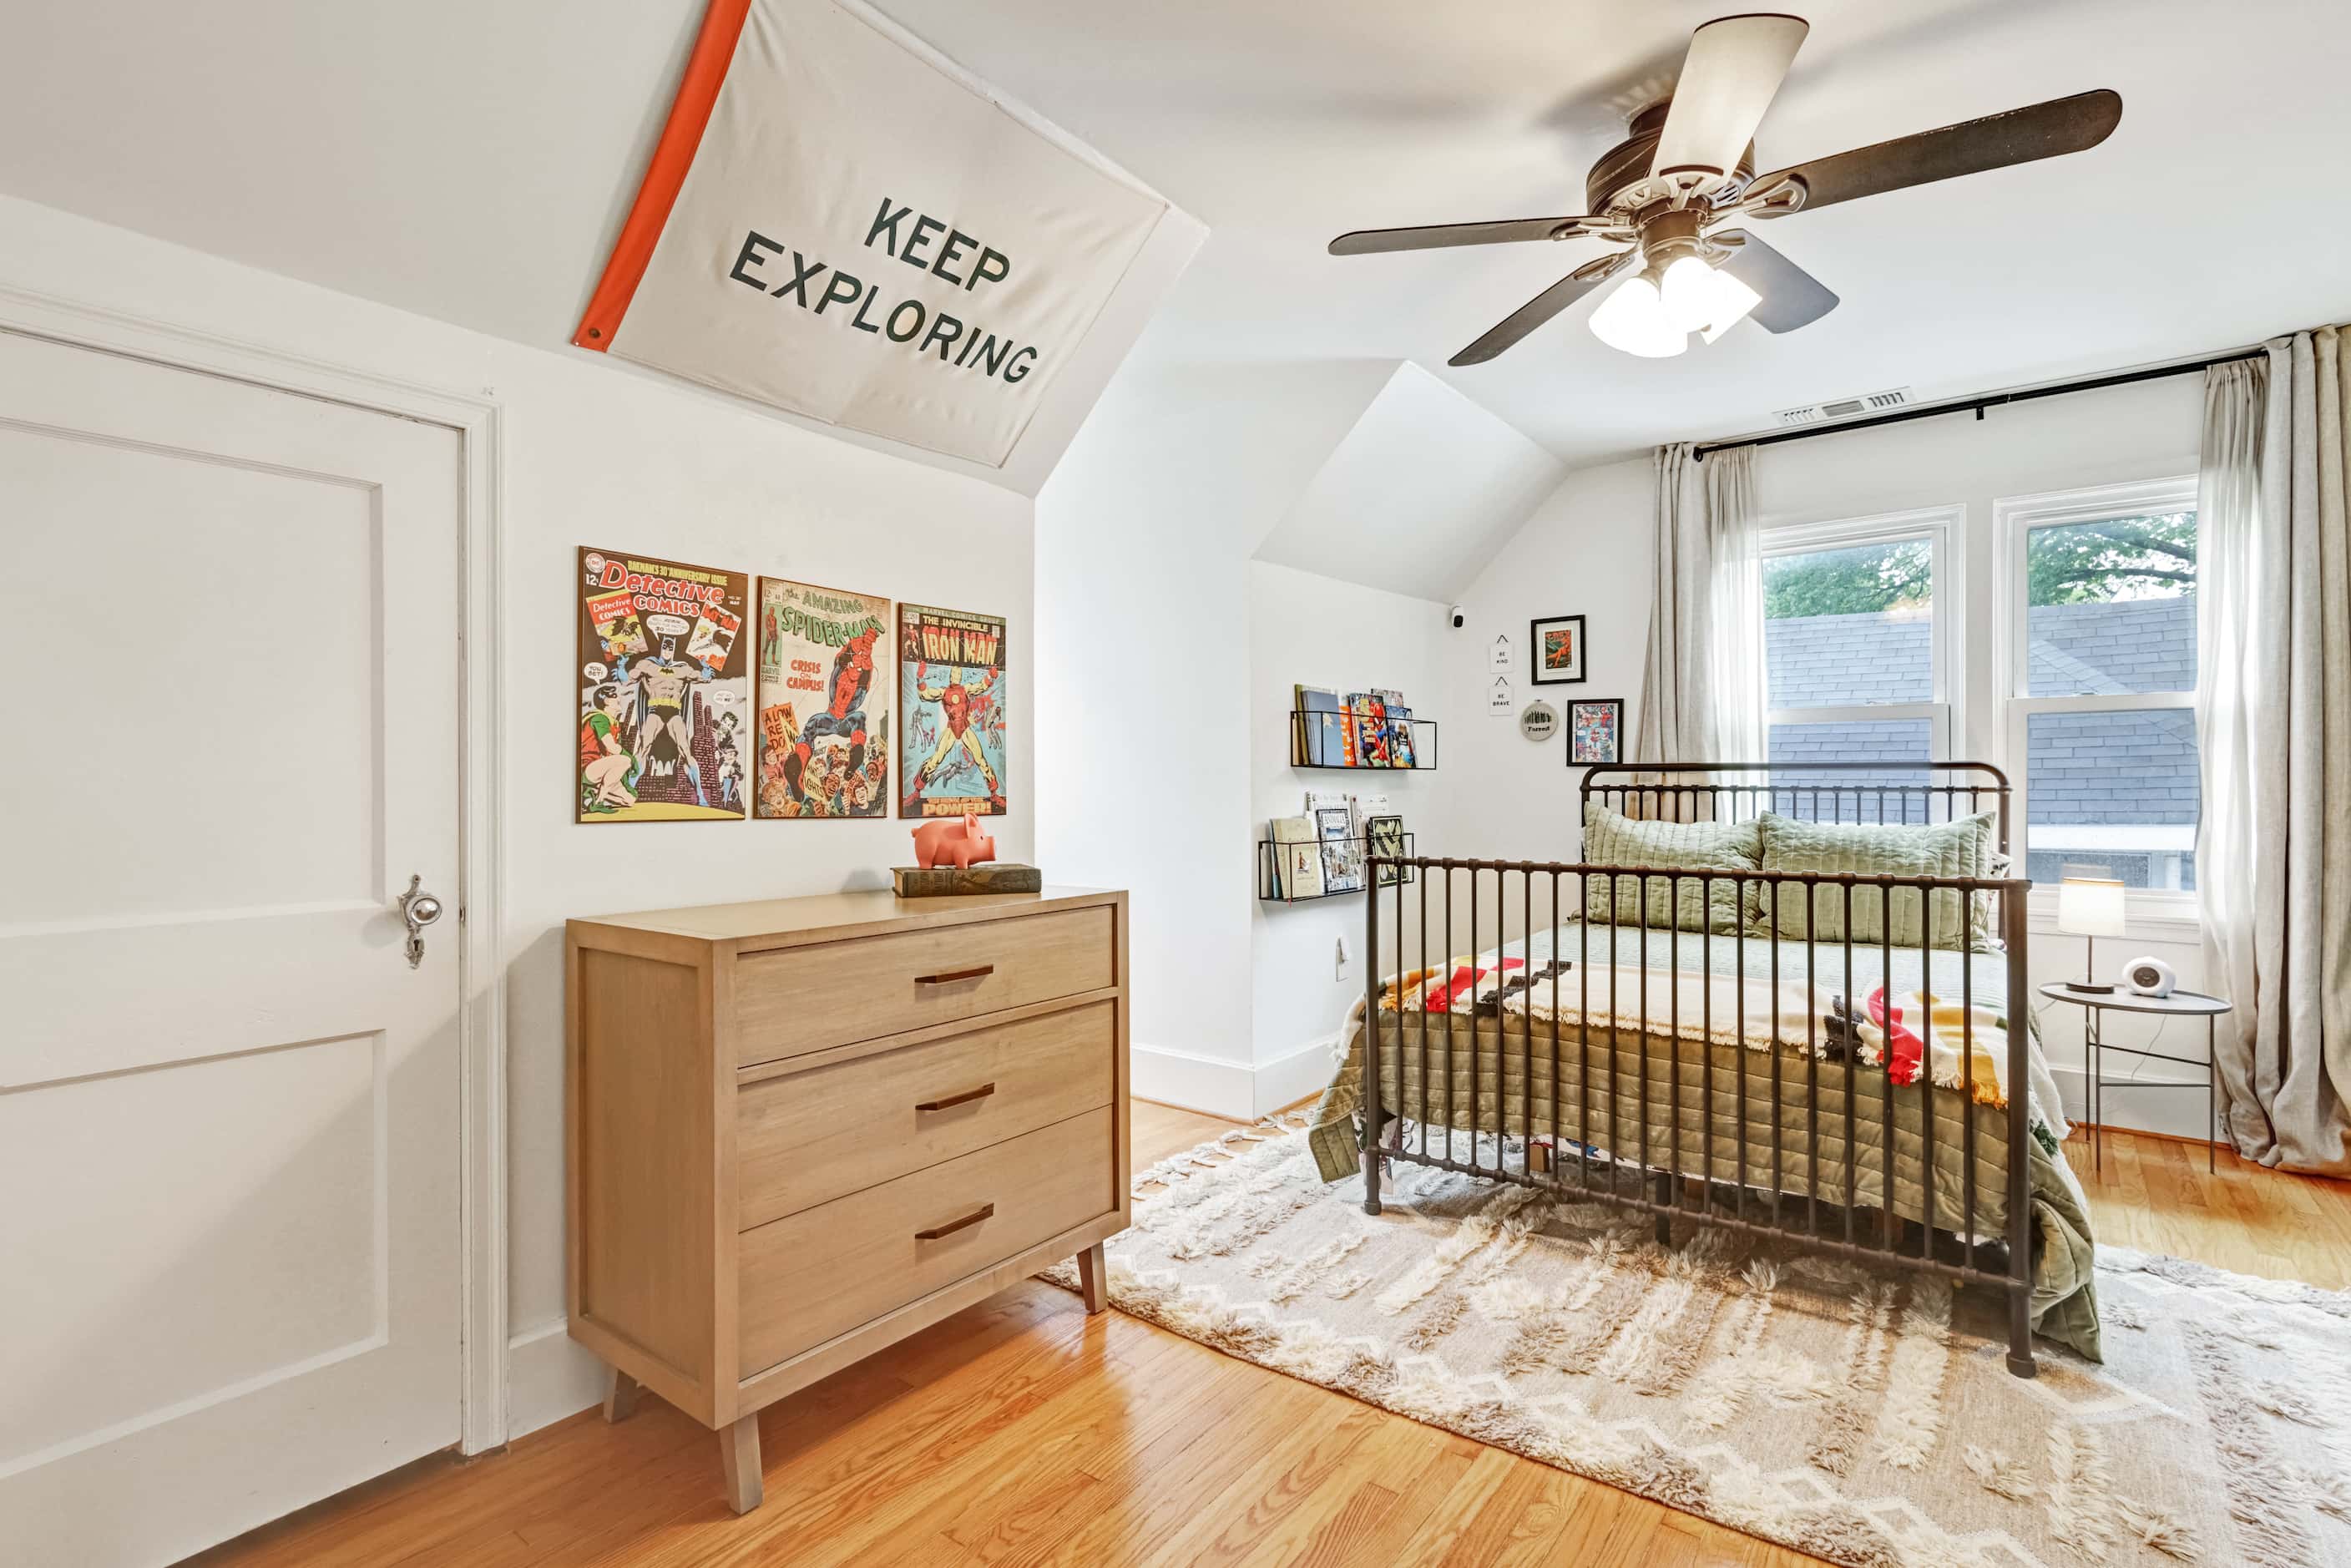 This upstairs bedroom has views of the neighborhood and plenty of natural light.